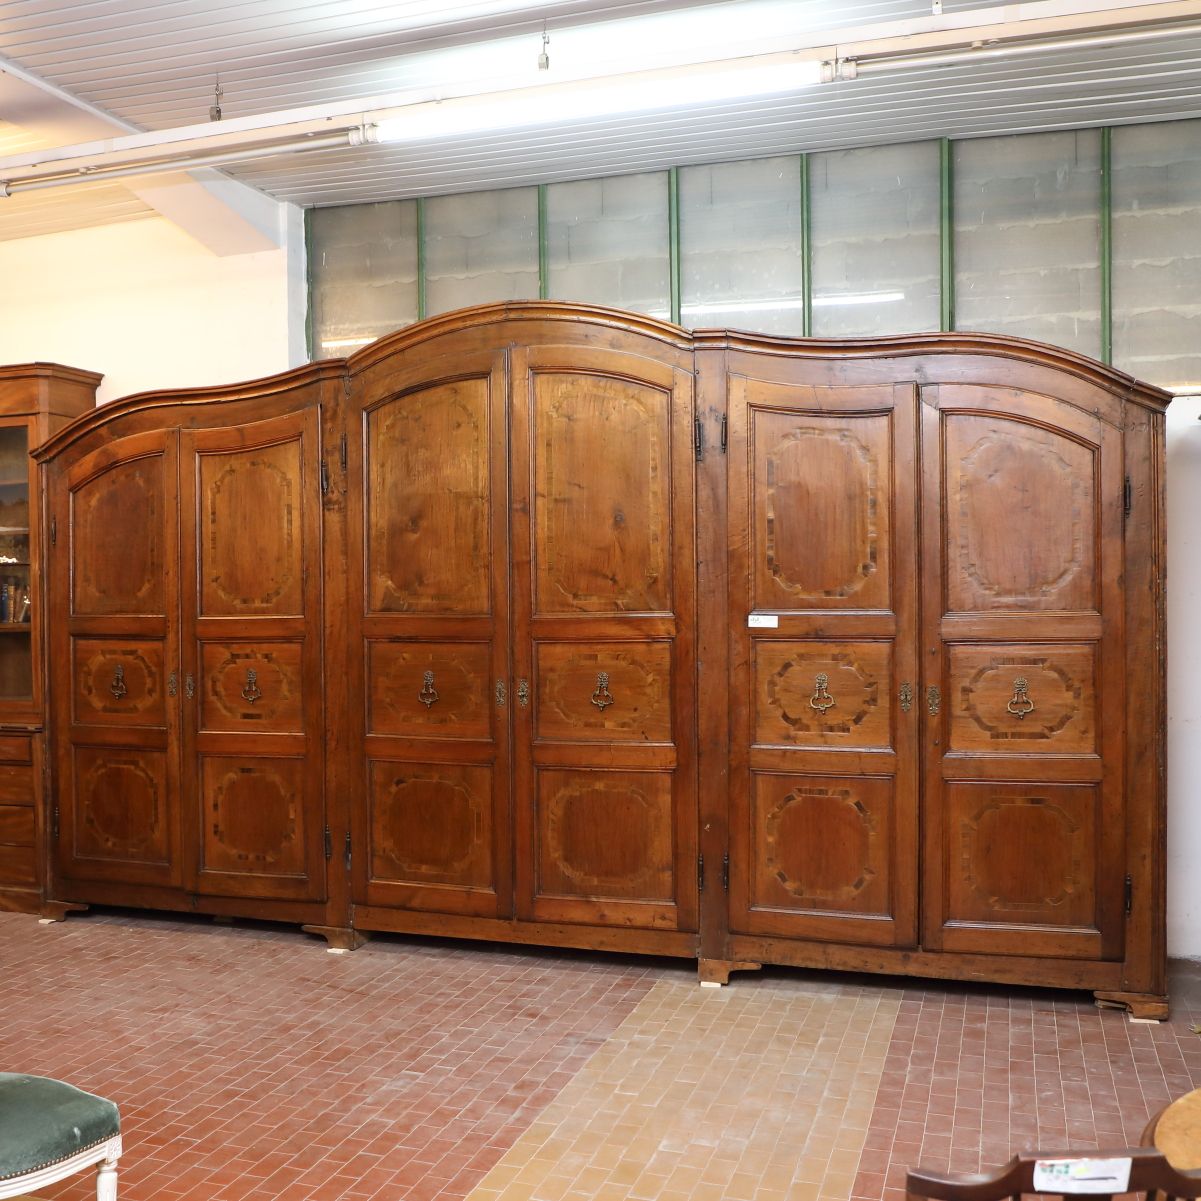 Italian Wardrobe With 6 Doors In Walnut With Inlays | Mobili Sisi Antique  Furniture Within 6 Doors Wardrobes (View 13 of 15)